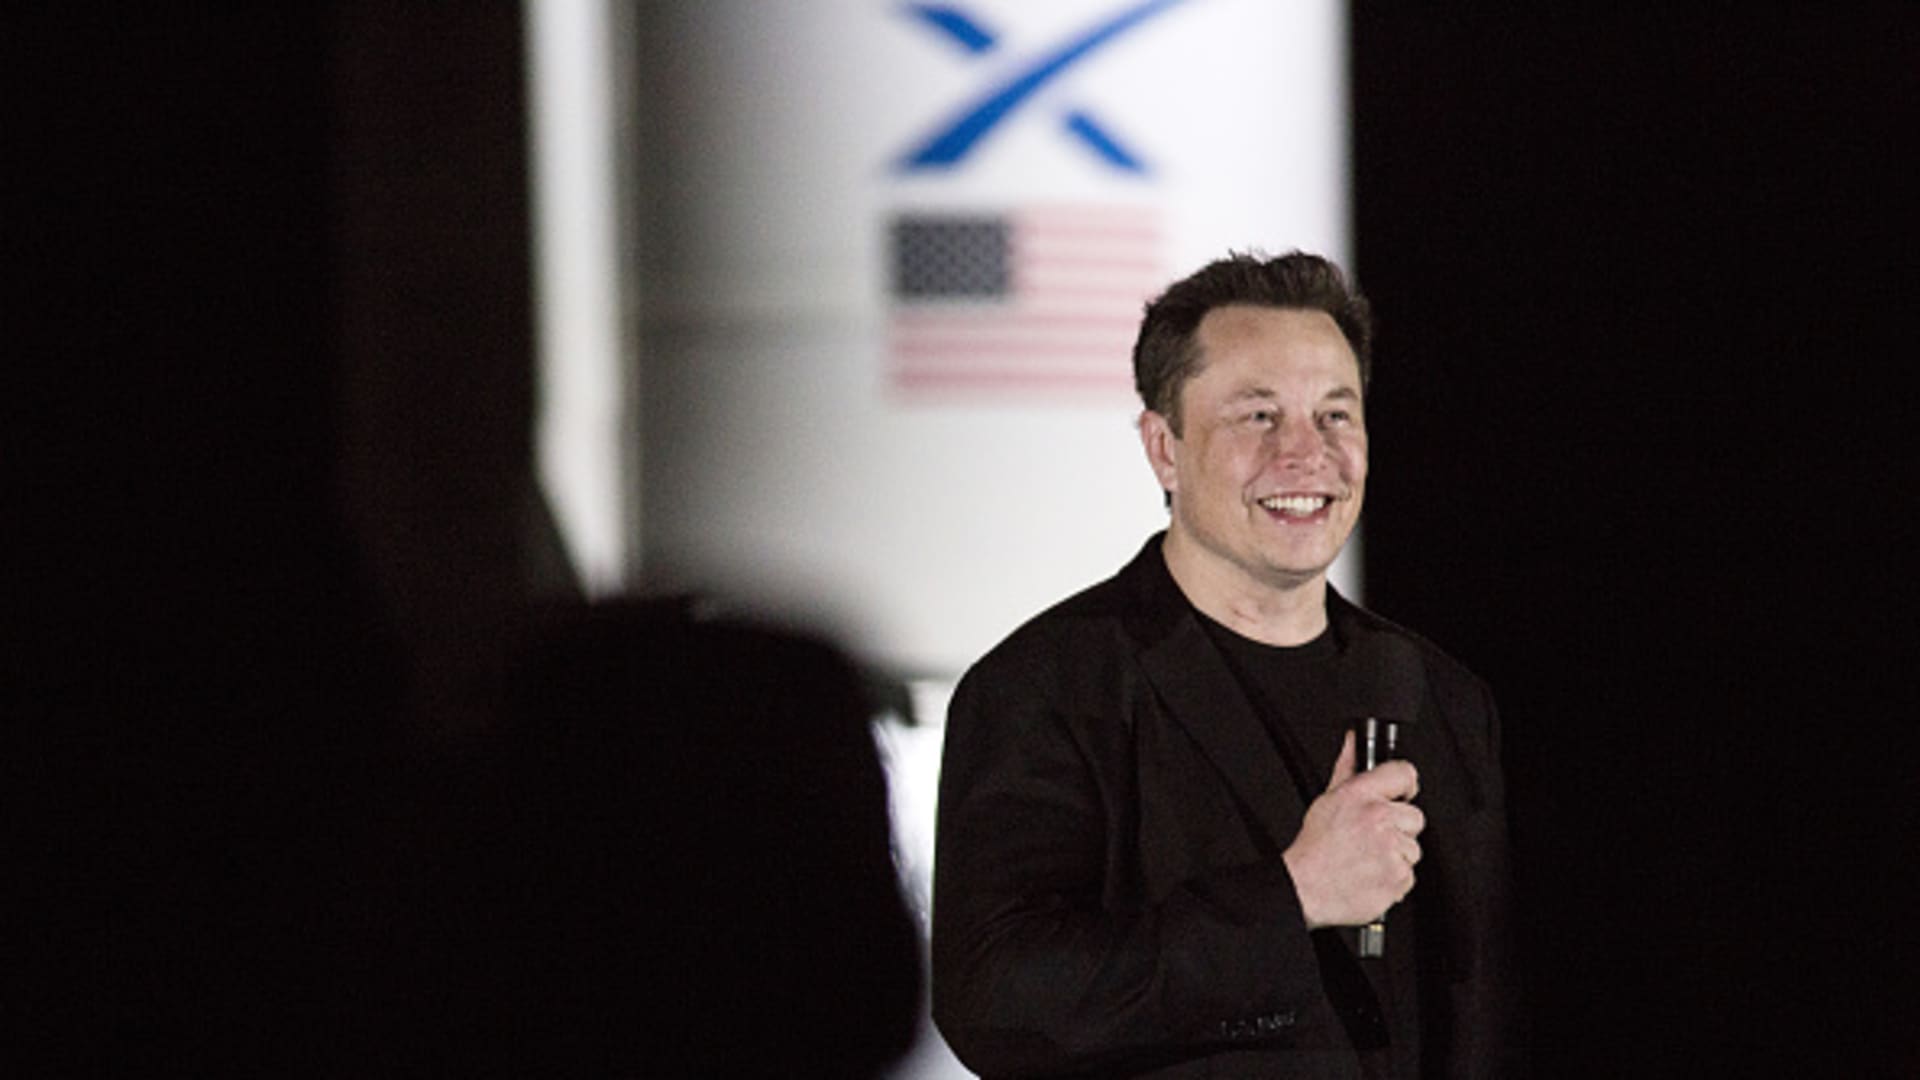 Elon Musk's college friend he's different from everyone